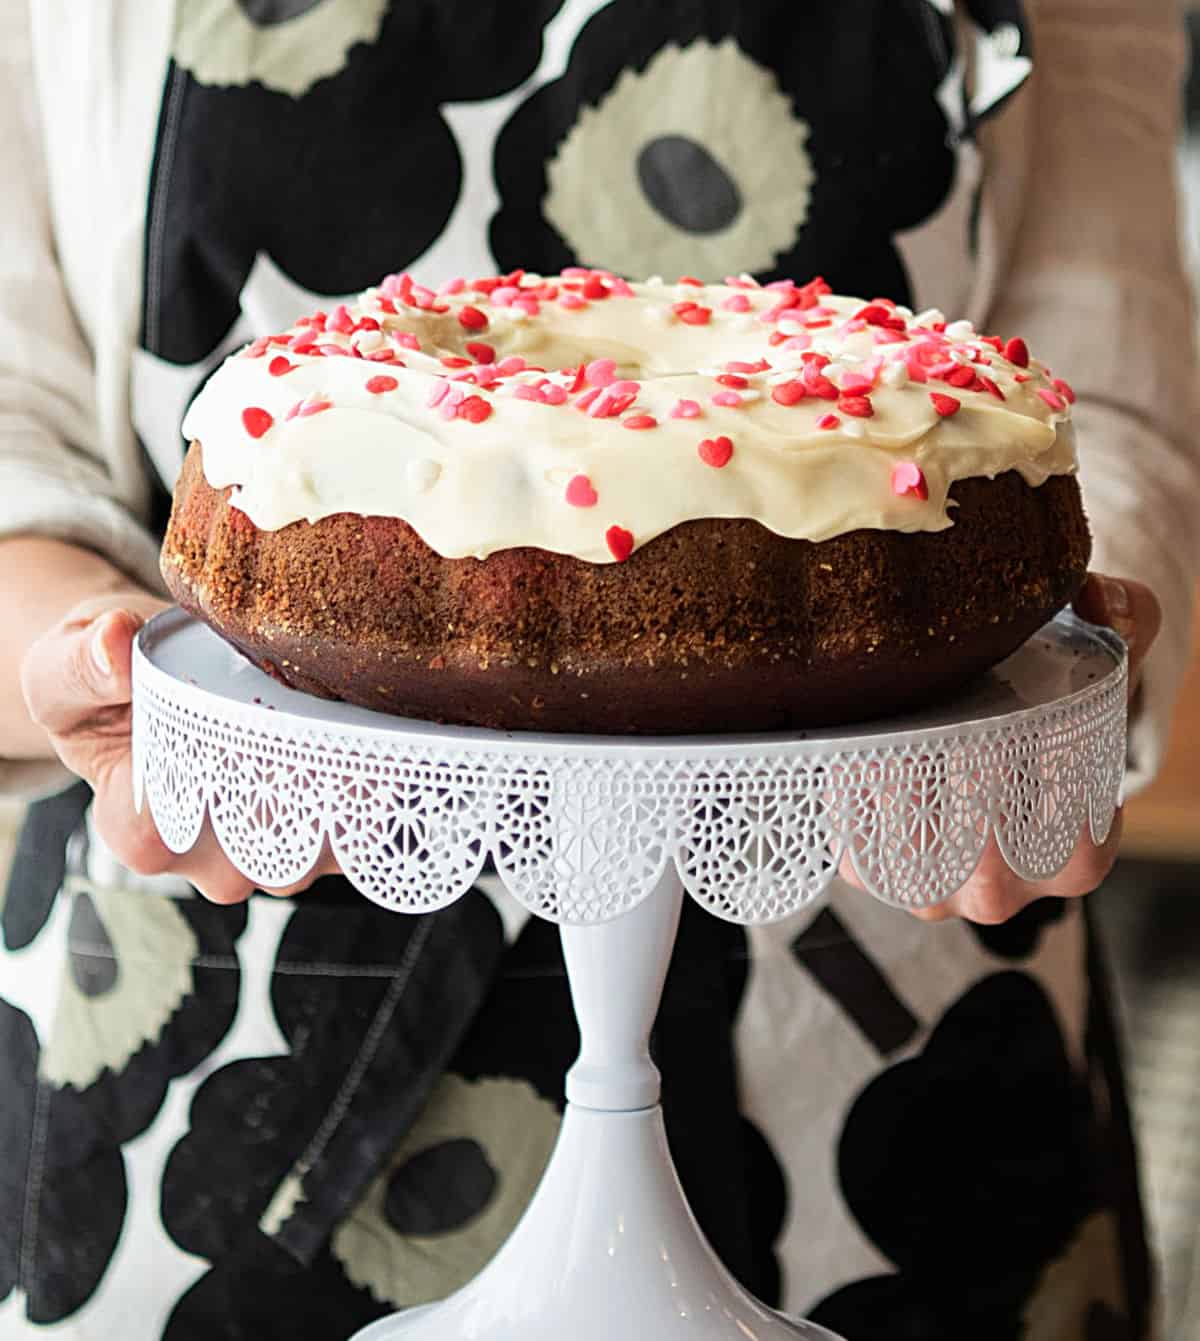 Partial view of person with apron holding frosted bundt cake on a white cake stand.